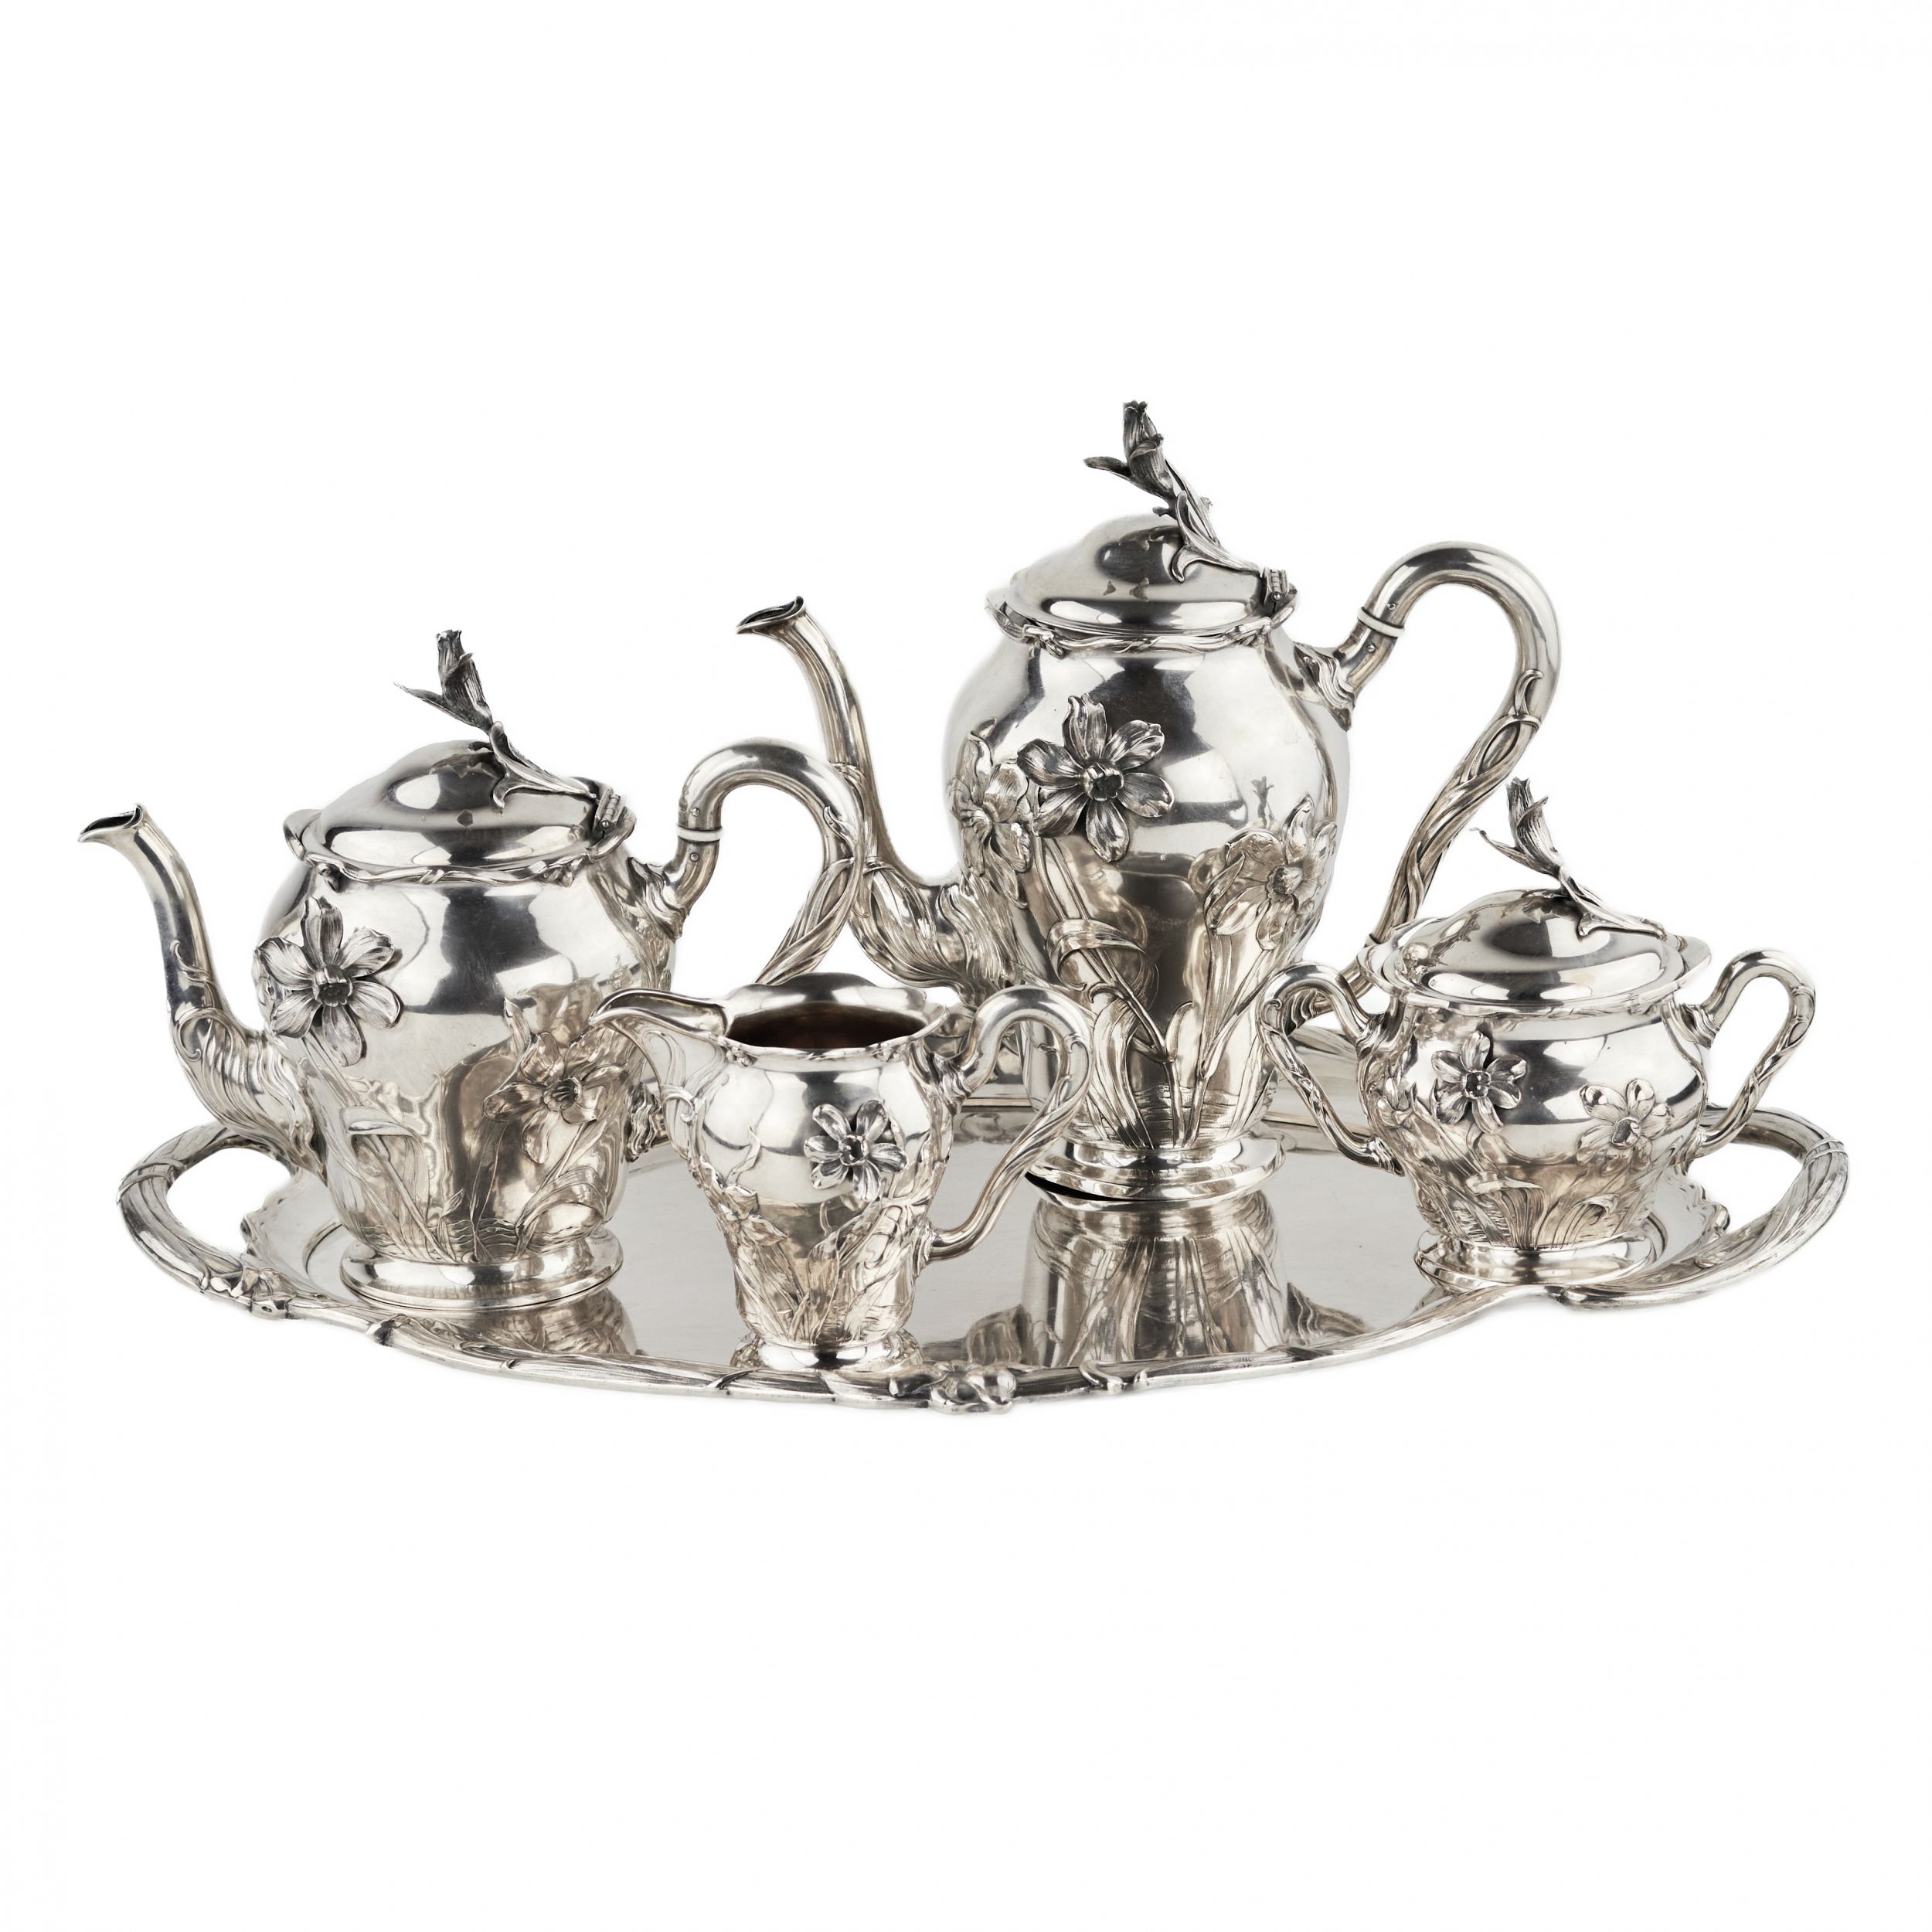 Silver-tea-and-coffee-service-in-Art-Nouveau-style-Bruckmann-After-1888